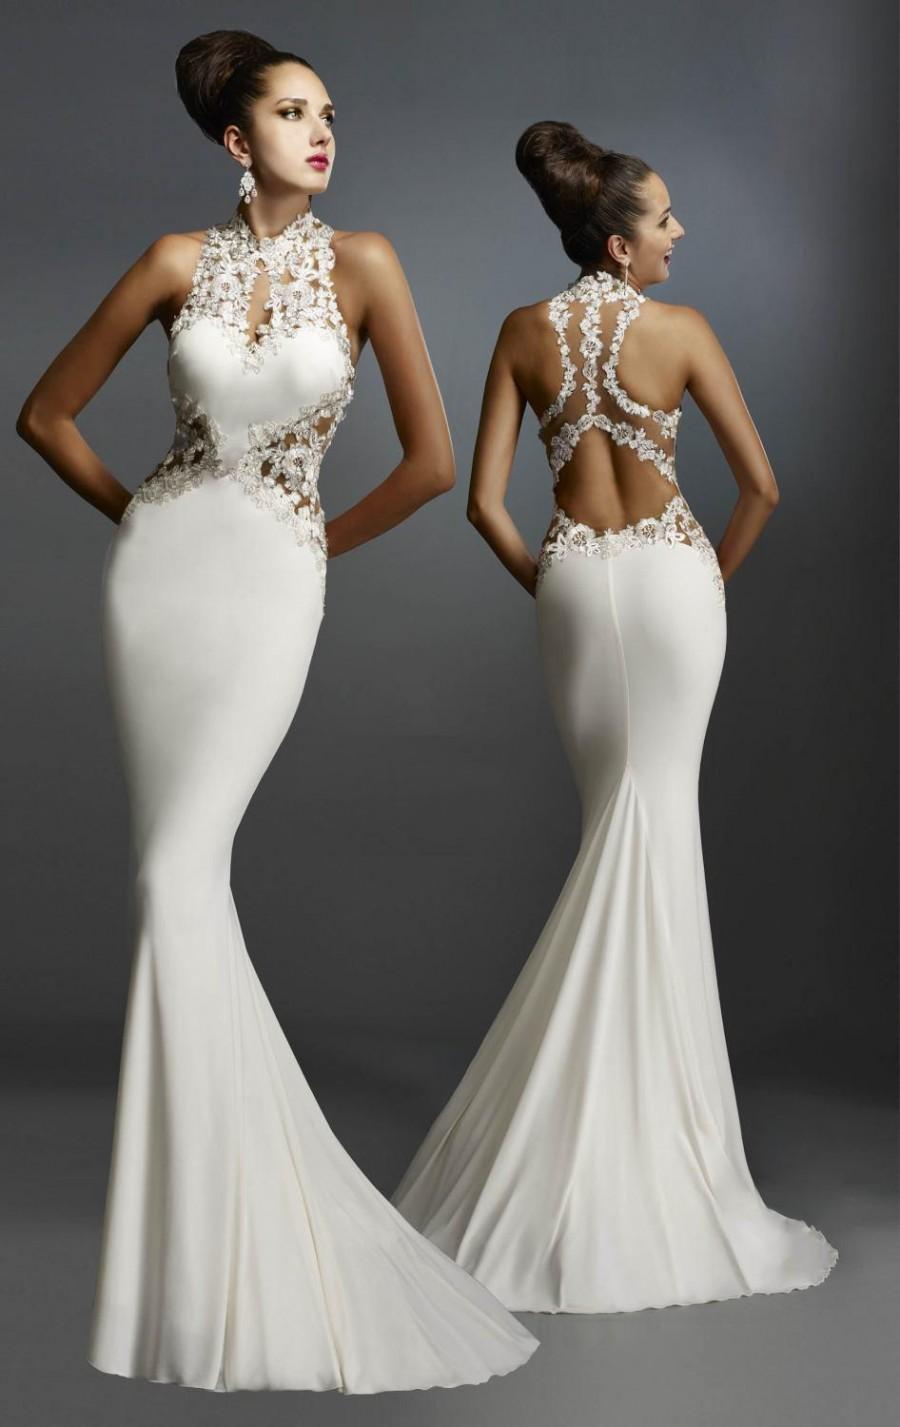 Wedding - Janique 2015 Sexy White Evening Dresses Mermaid Embroidered Sheer High Neck Lace Backless Sweep See Through Custom Prom Dresses Gowns Party, $108.05 